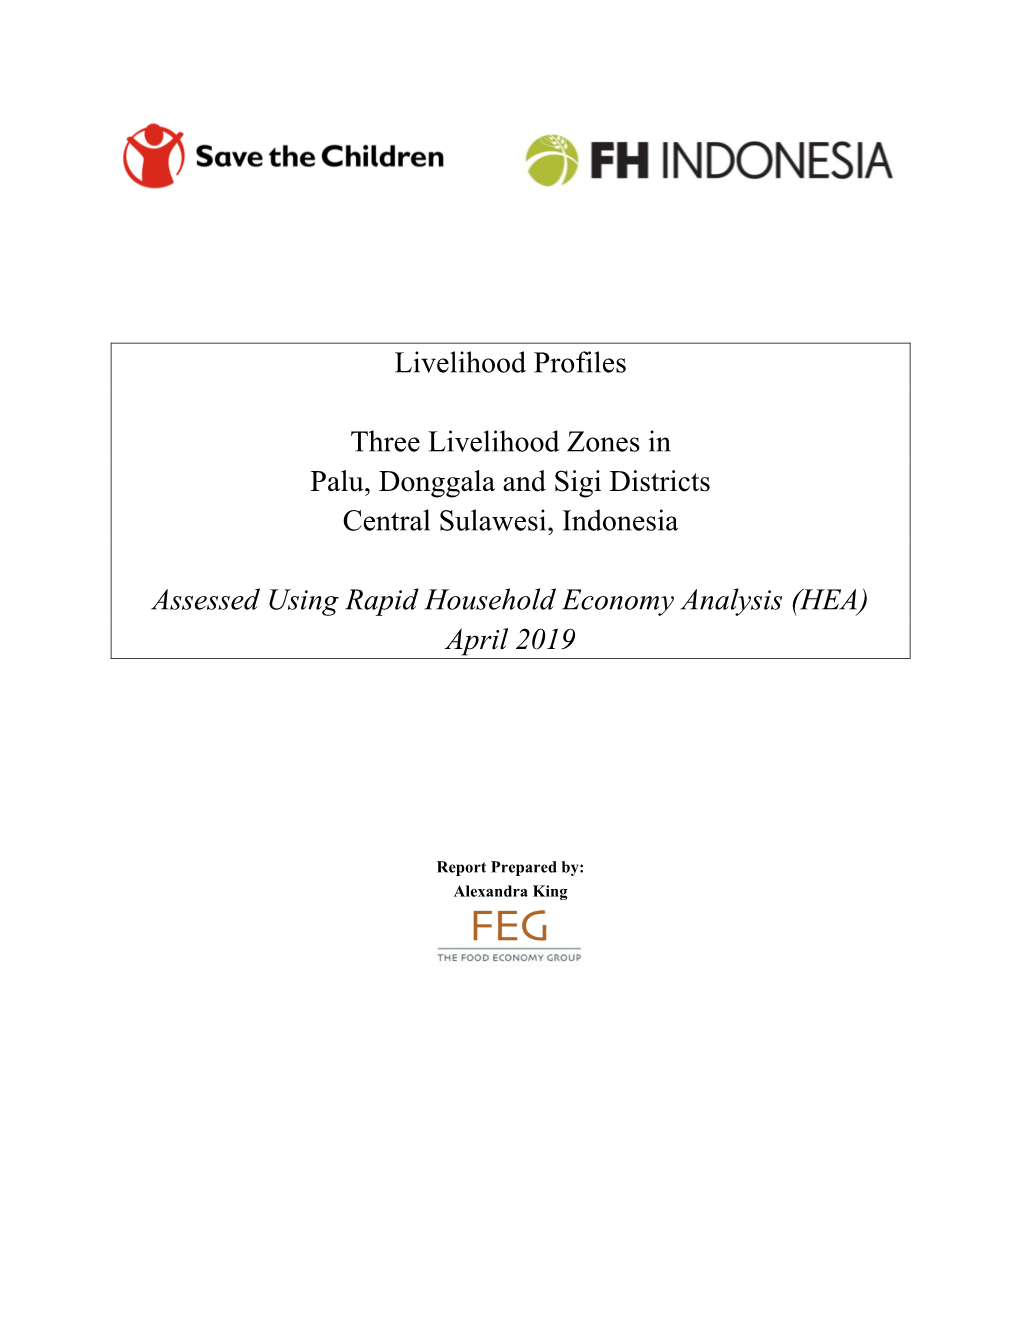 Livelihood Profiles Three Livelihood Zones in Palu, Donggala and Sigi Districts Central Sulawesi, Indonesia Assessed Using Rapid